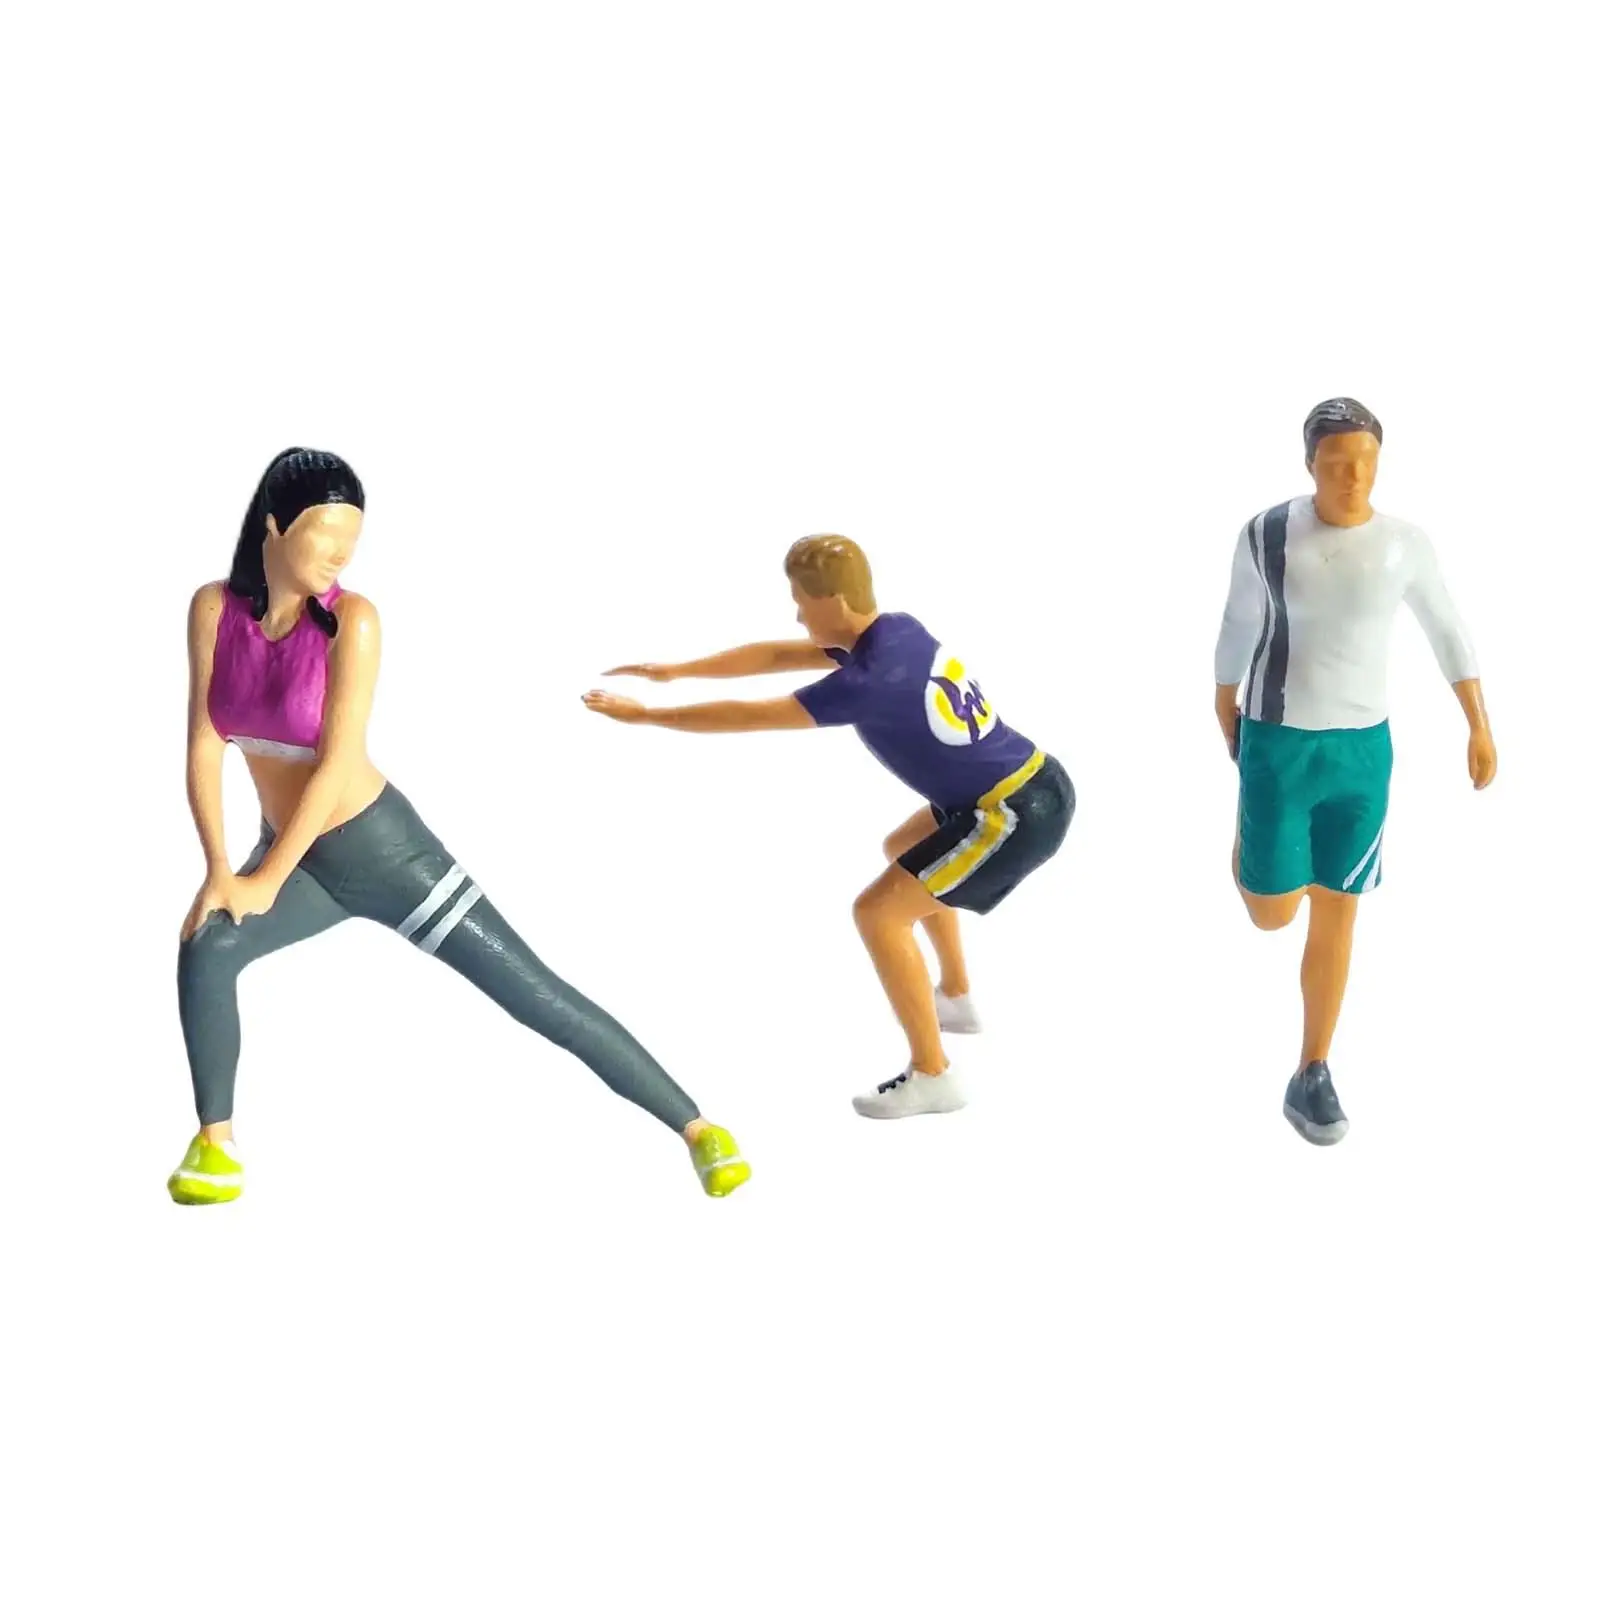 3 Pieces 1/64 Fitness People Figures Collections Movie Props Trains Architectural Miniature Scenes Resin Figurines Decoration